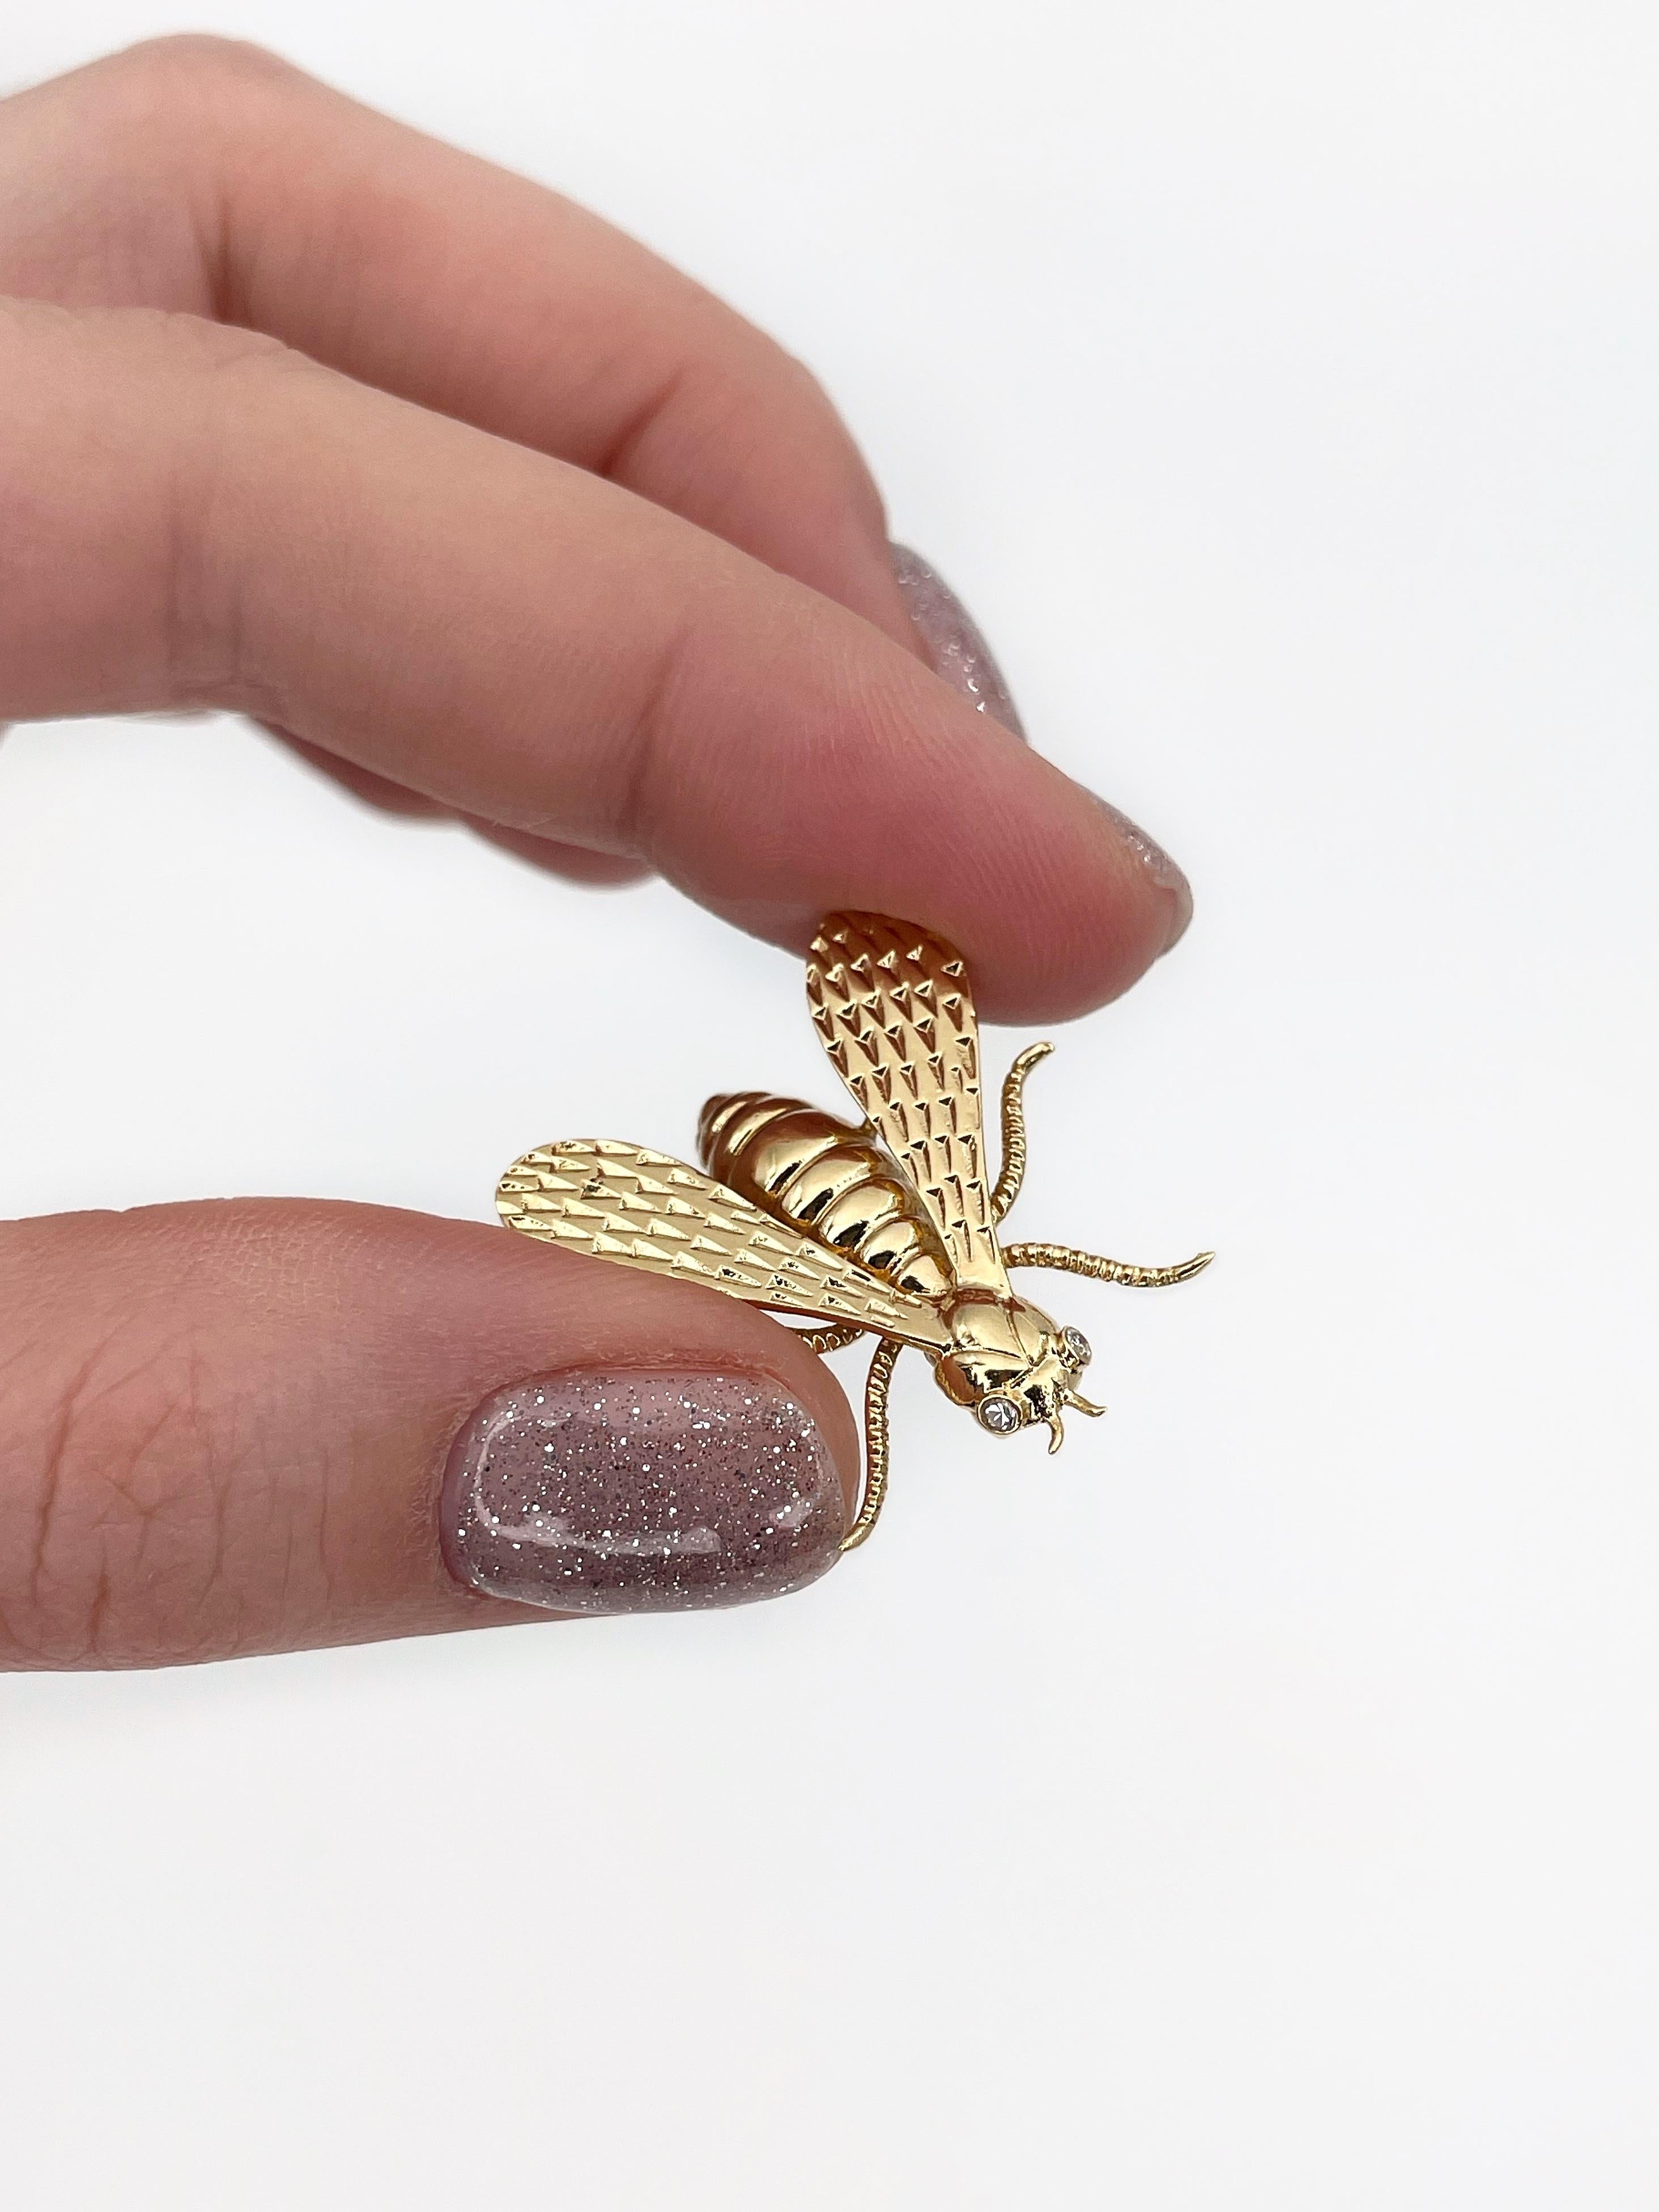 This is a lovely bee shape brooch designed by Chaumet in 1990s. It is crafted in 18K yellow gold. Insect has two diamond eyes (0.03ct, RW-W, SI-P1). The piece is signed “Chaumet - Paris”. 

It is a stylish accessory for anyone.

Weight: 5.38g
Size: